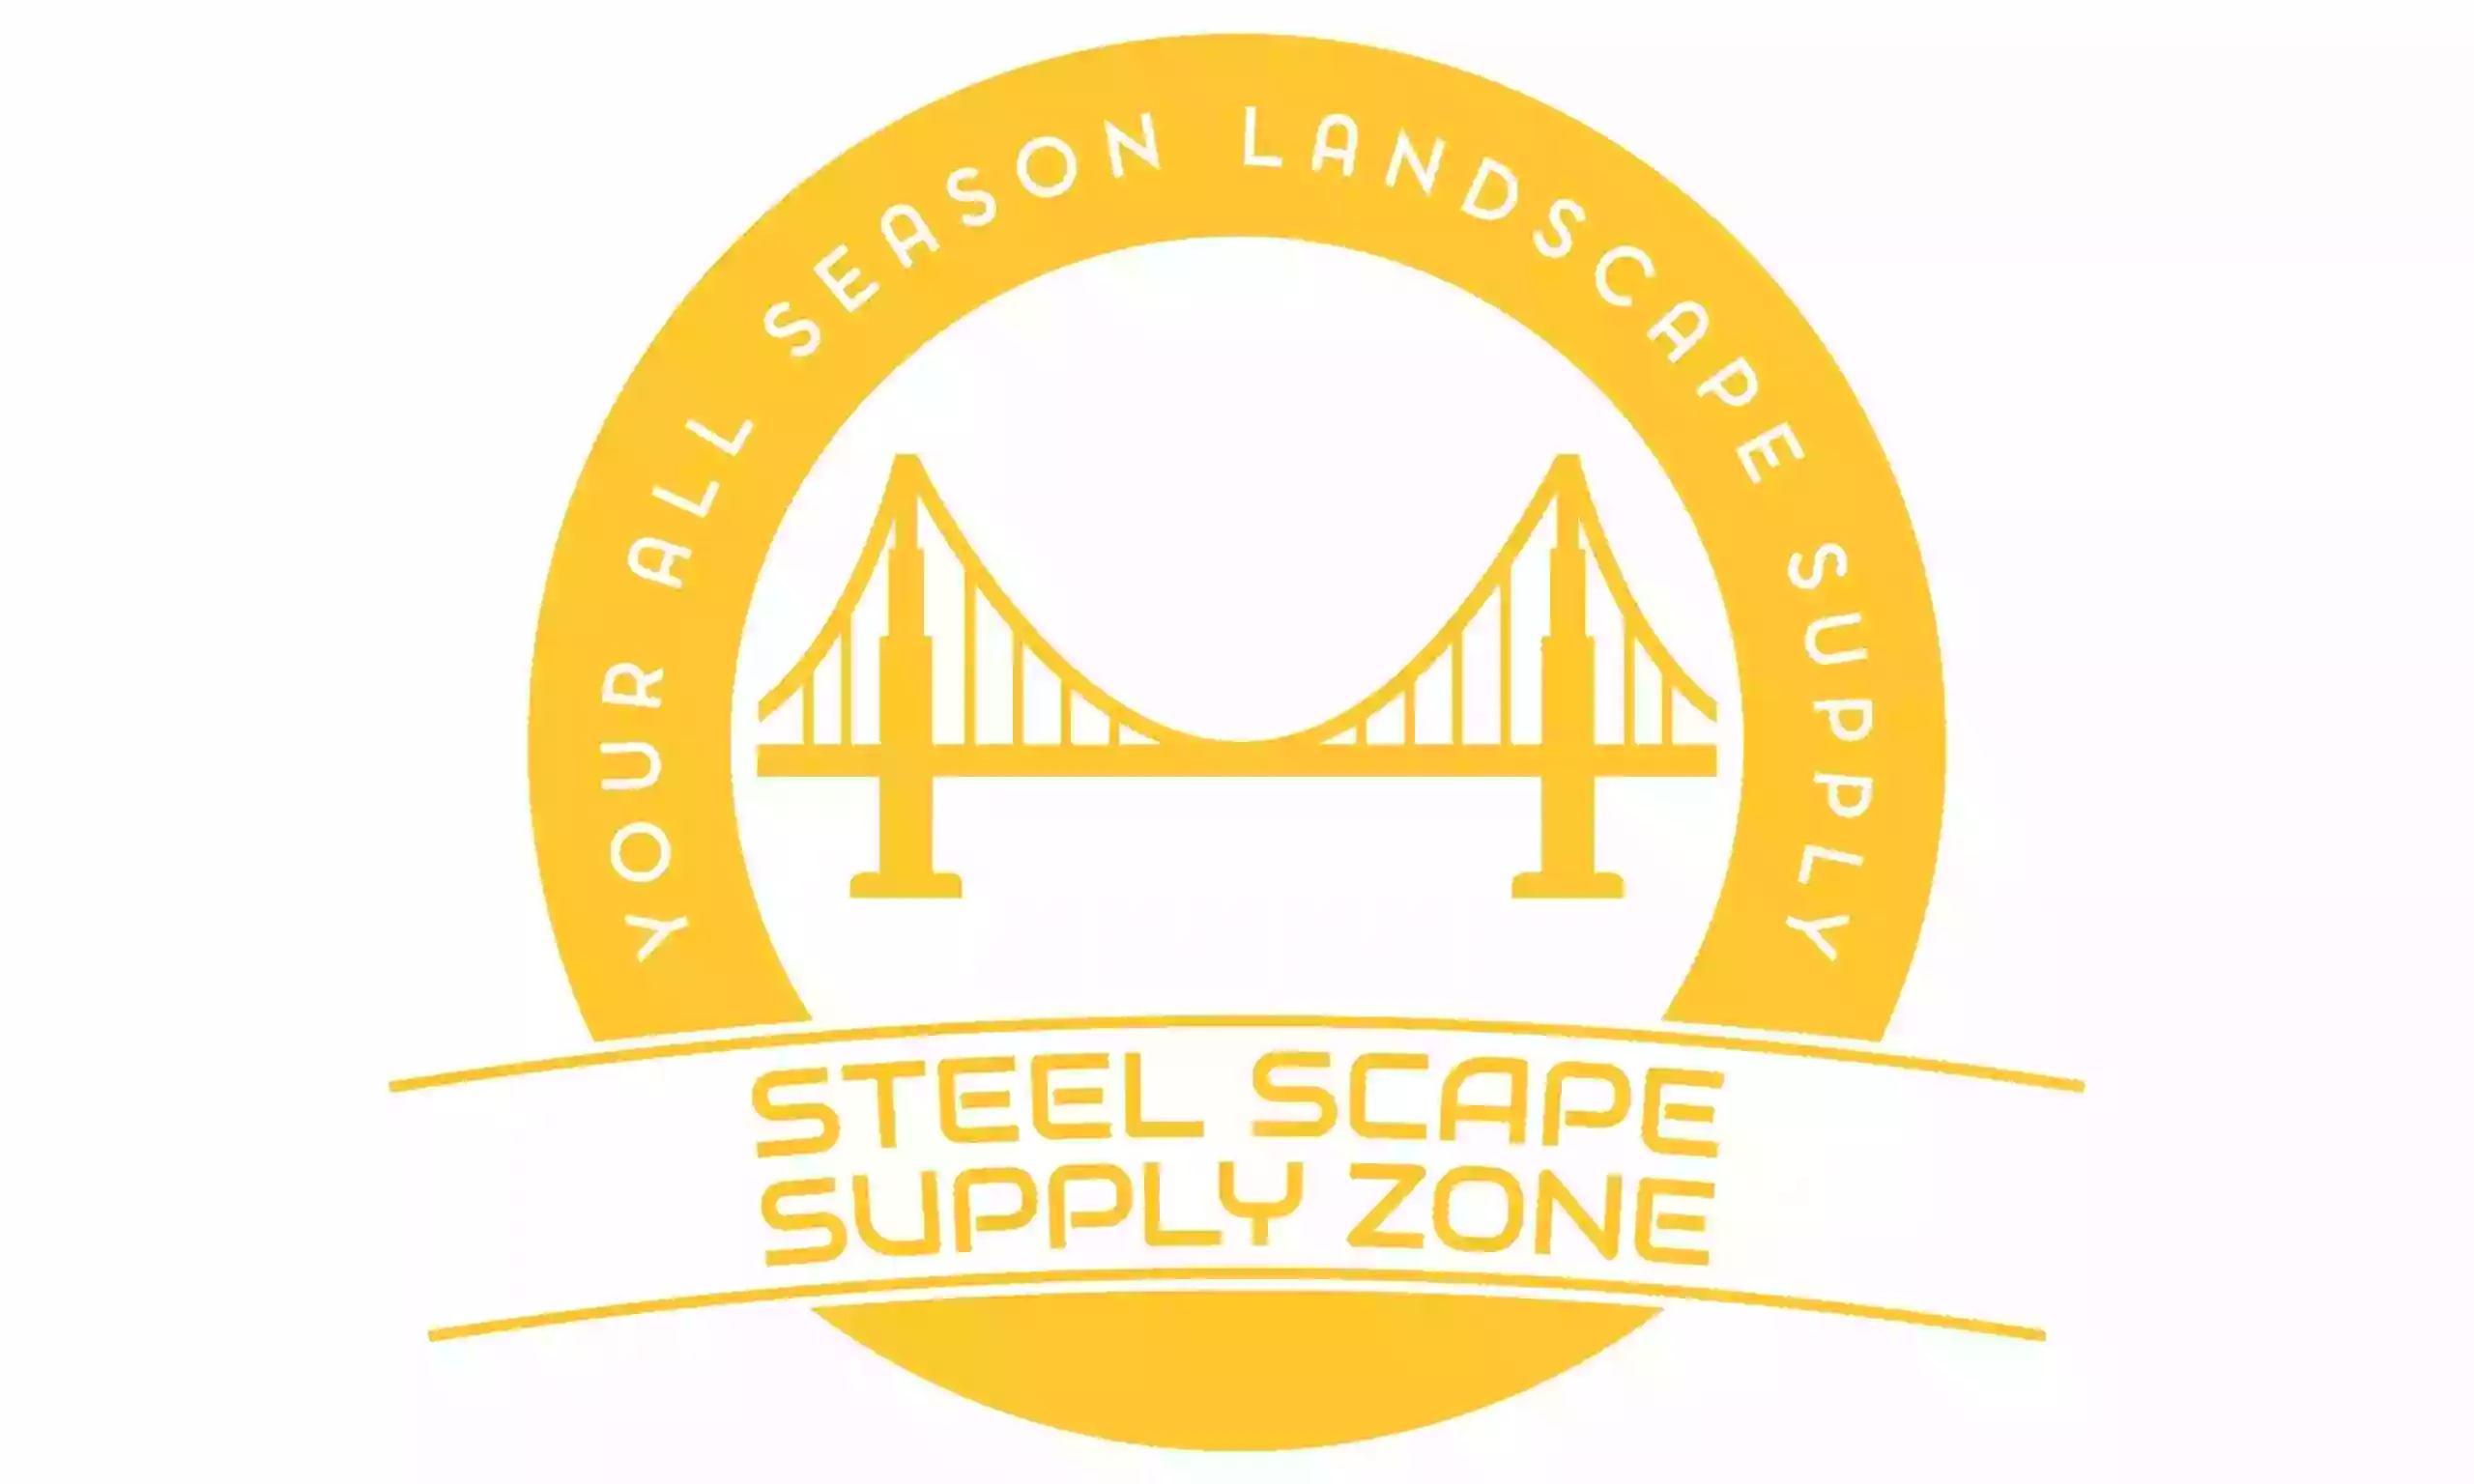 Steel scape supply zone